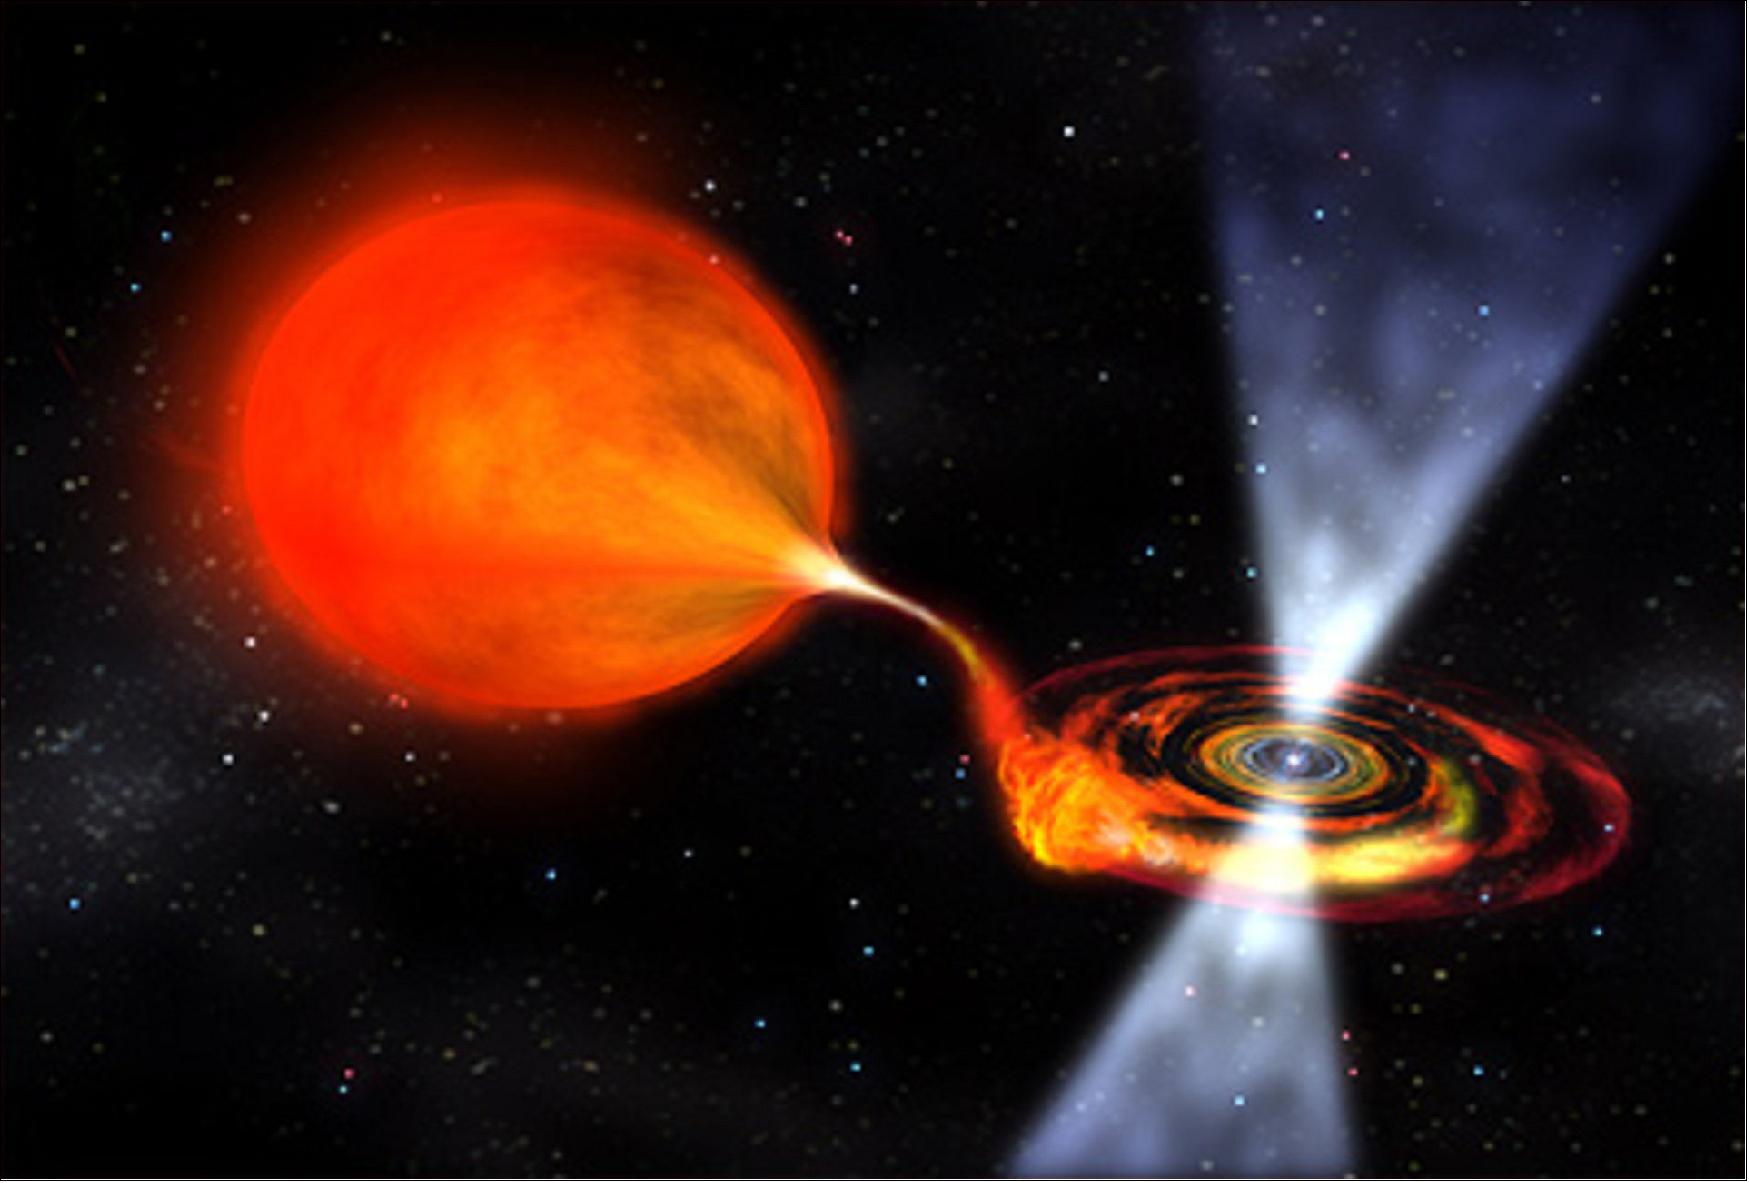 Figure 49: This is an artist's impression of a spinning neutron star (pulsar) approximately 20 km in diameter, accreting material from a companion star. The strong gravity from the dense pulsar attracts material from the companion. The flow of gas from the companion to the pulsar is energetic and glows in X-ray light (image credit: NASA/Dana Berry) 53)